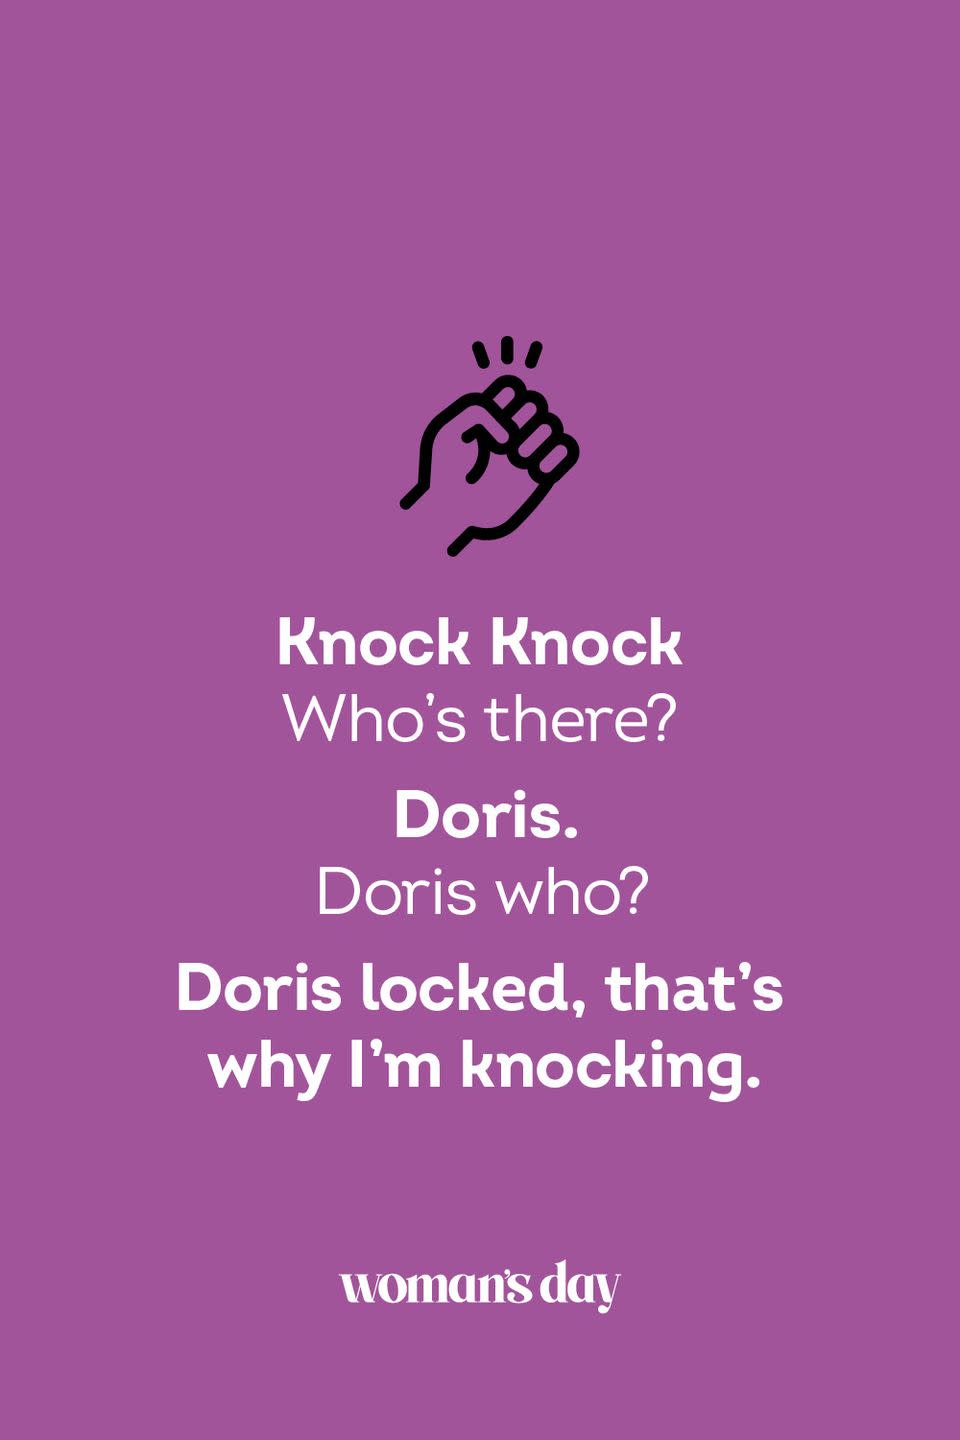 <p><strong>Knock Knock</strong></p><p><em>Who’s there? </em></p><p><strong>Doris.</strong></p><p><em>Doris who?</em></p><p><strong>Doris locked, that’s why I’m knocking.</strong></p>